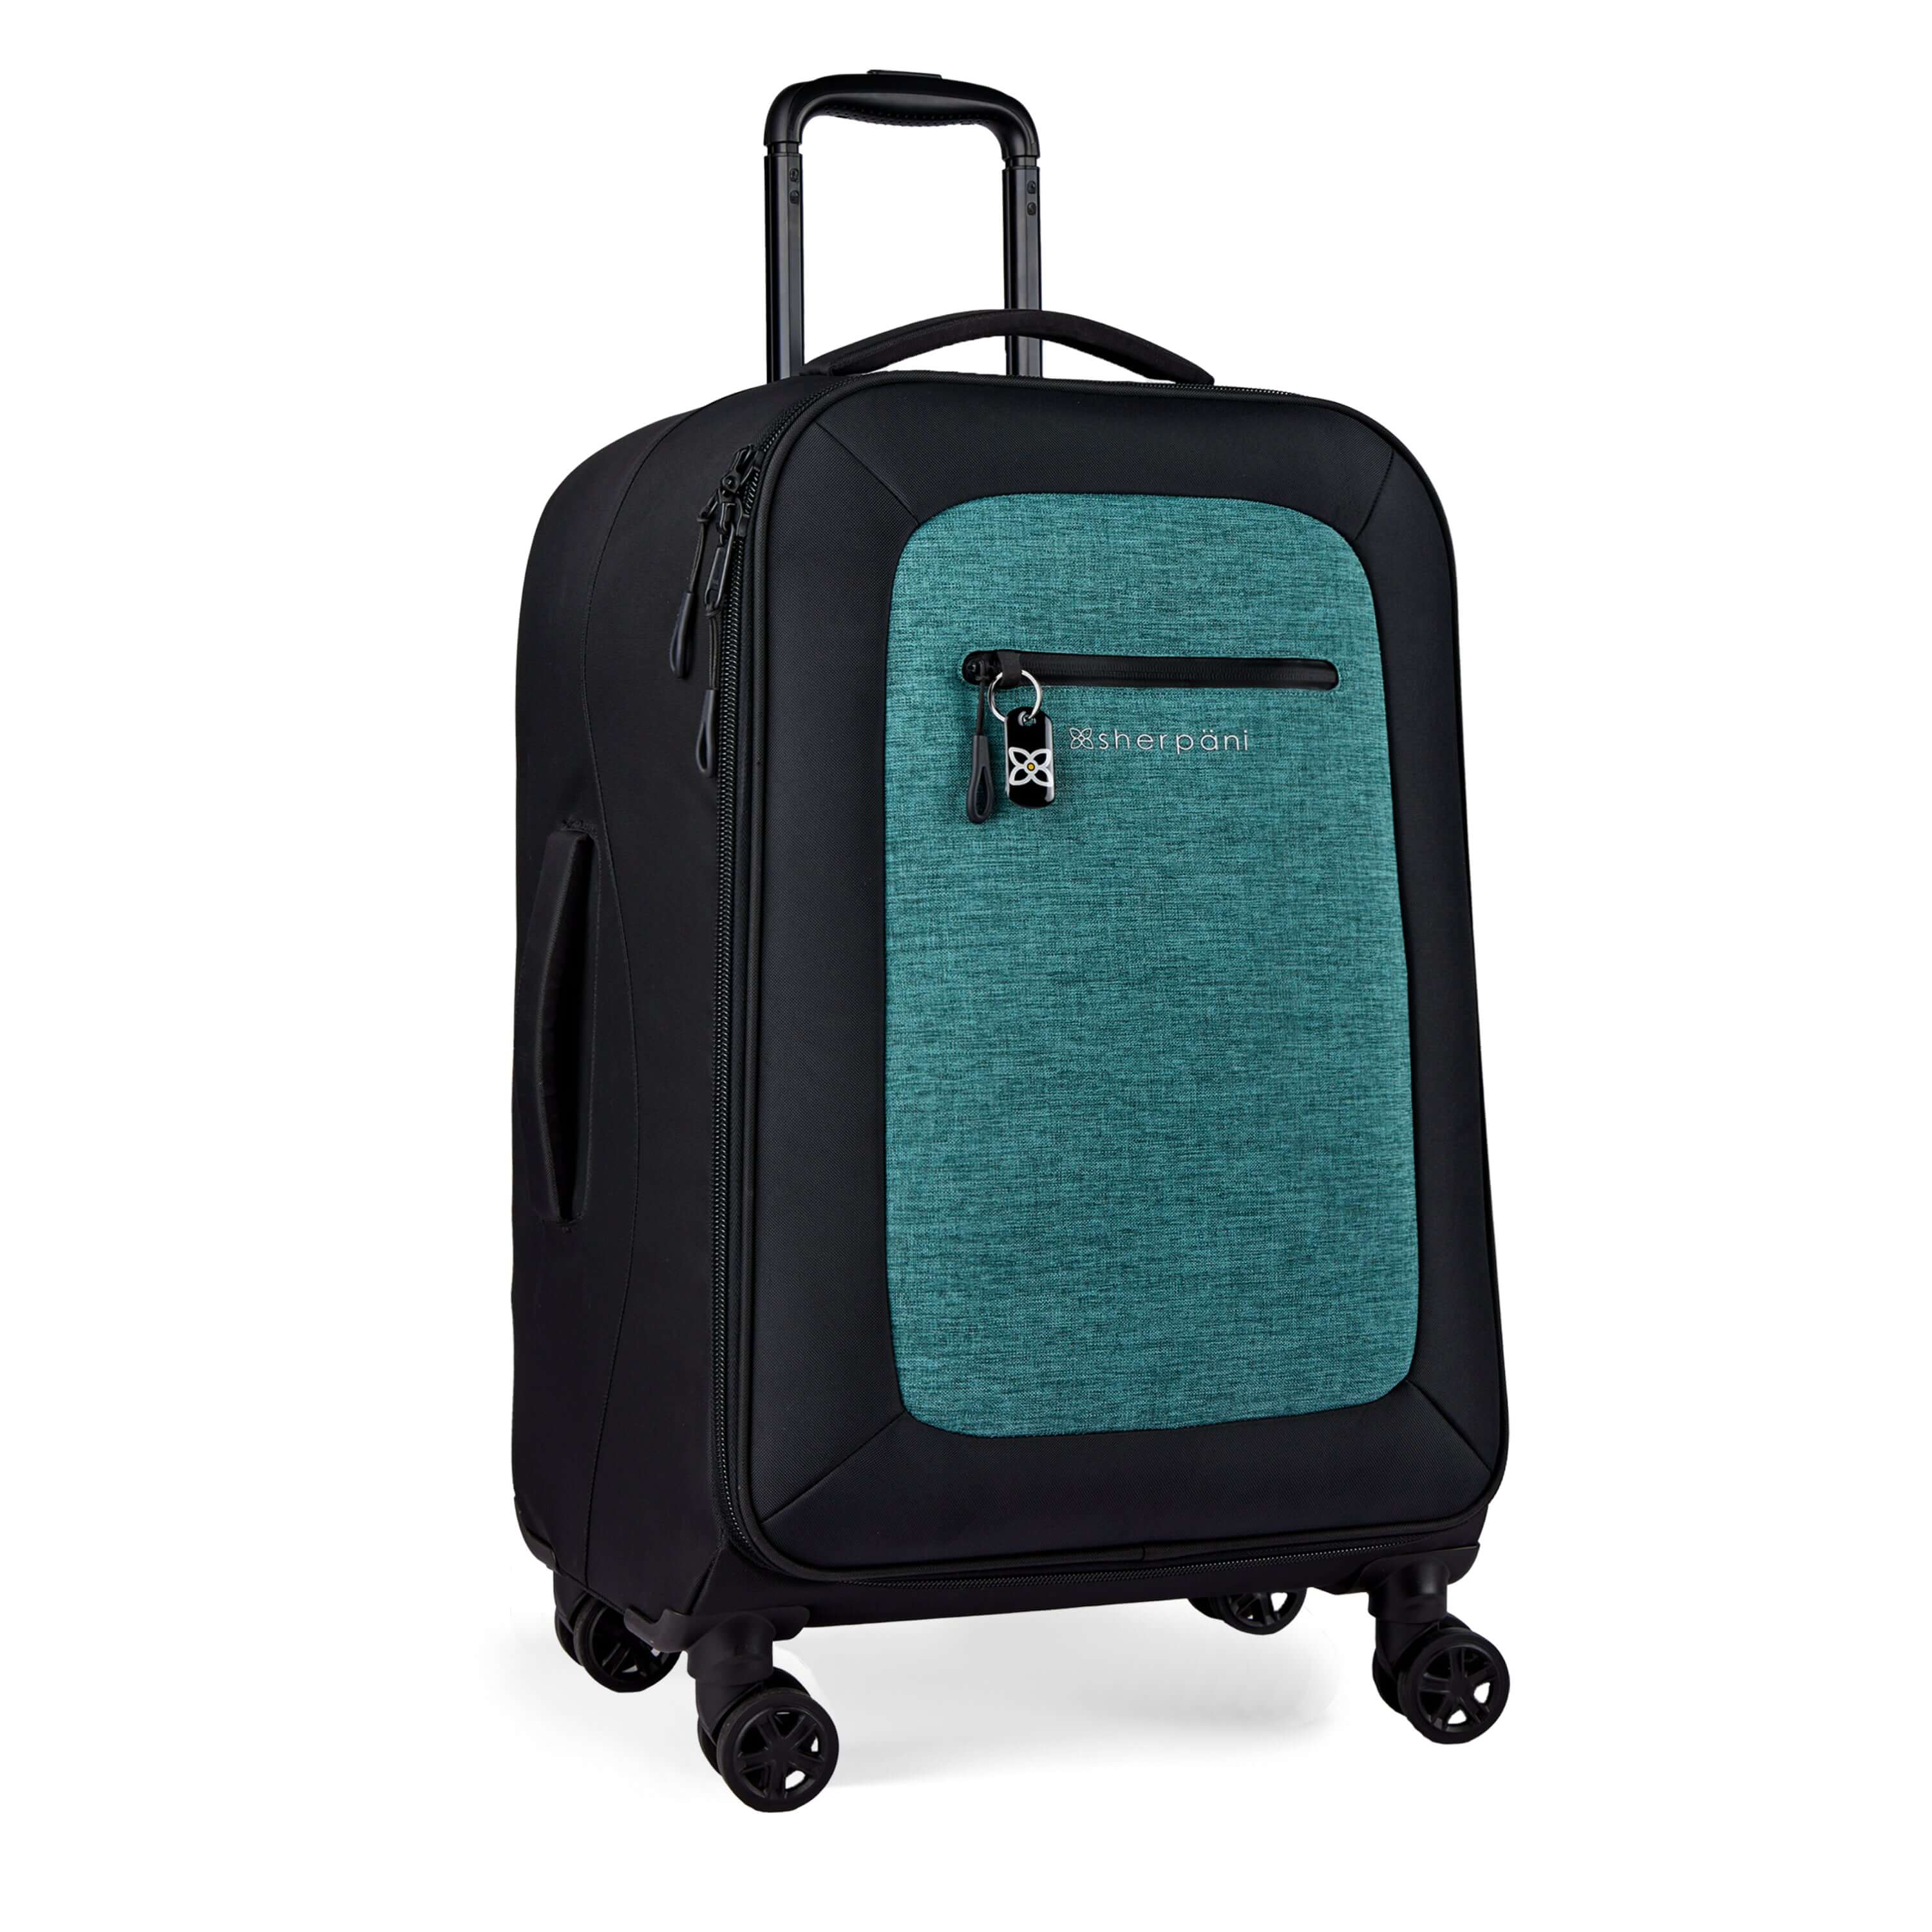 Angled front view of Sherpani’s Anti-Theft luggage the Hemisphere in Teal. The suitcase has a soft shell exterior made from recycled plastic bottles and features vegan leather accents in black. There is a main zipper compartment and an external pocket on the front with a locking zipper and a ReturnMe tag. On the top of the suitcase sits a retractable luggage handle. On the top and side sit two easy-access handles. At the bottom are four 36-degree spinner wheels for smooth rolling. 